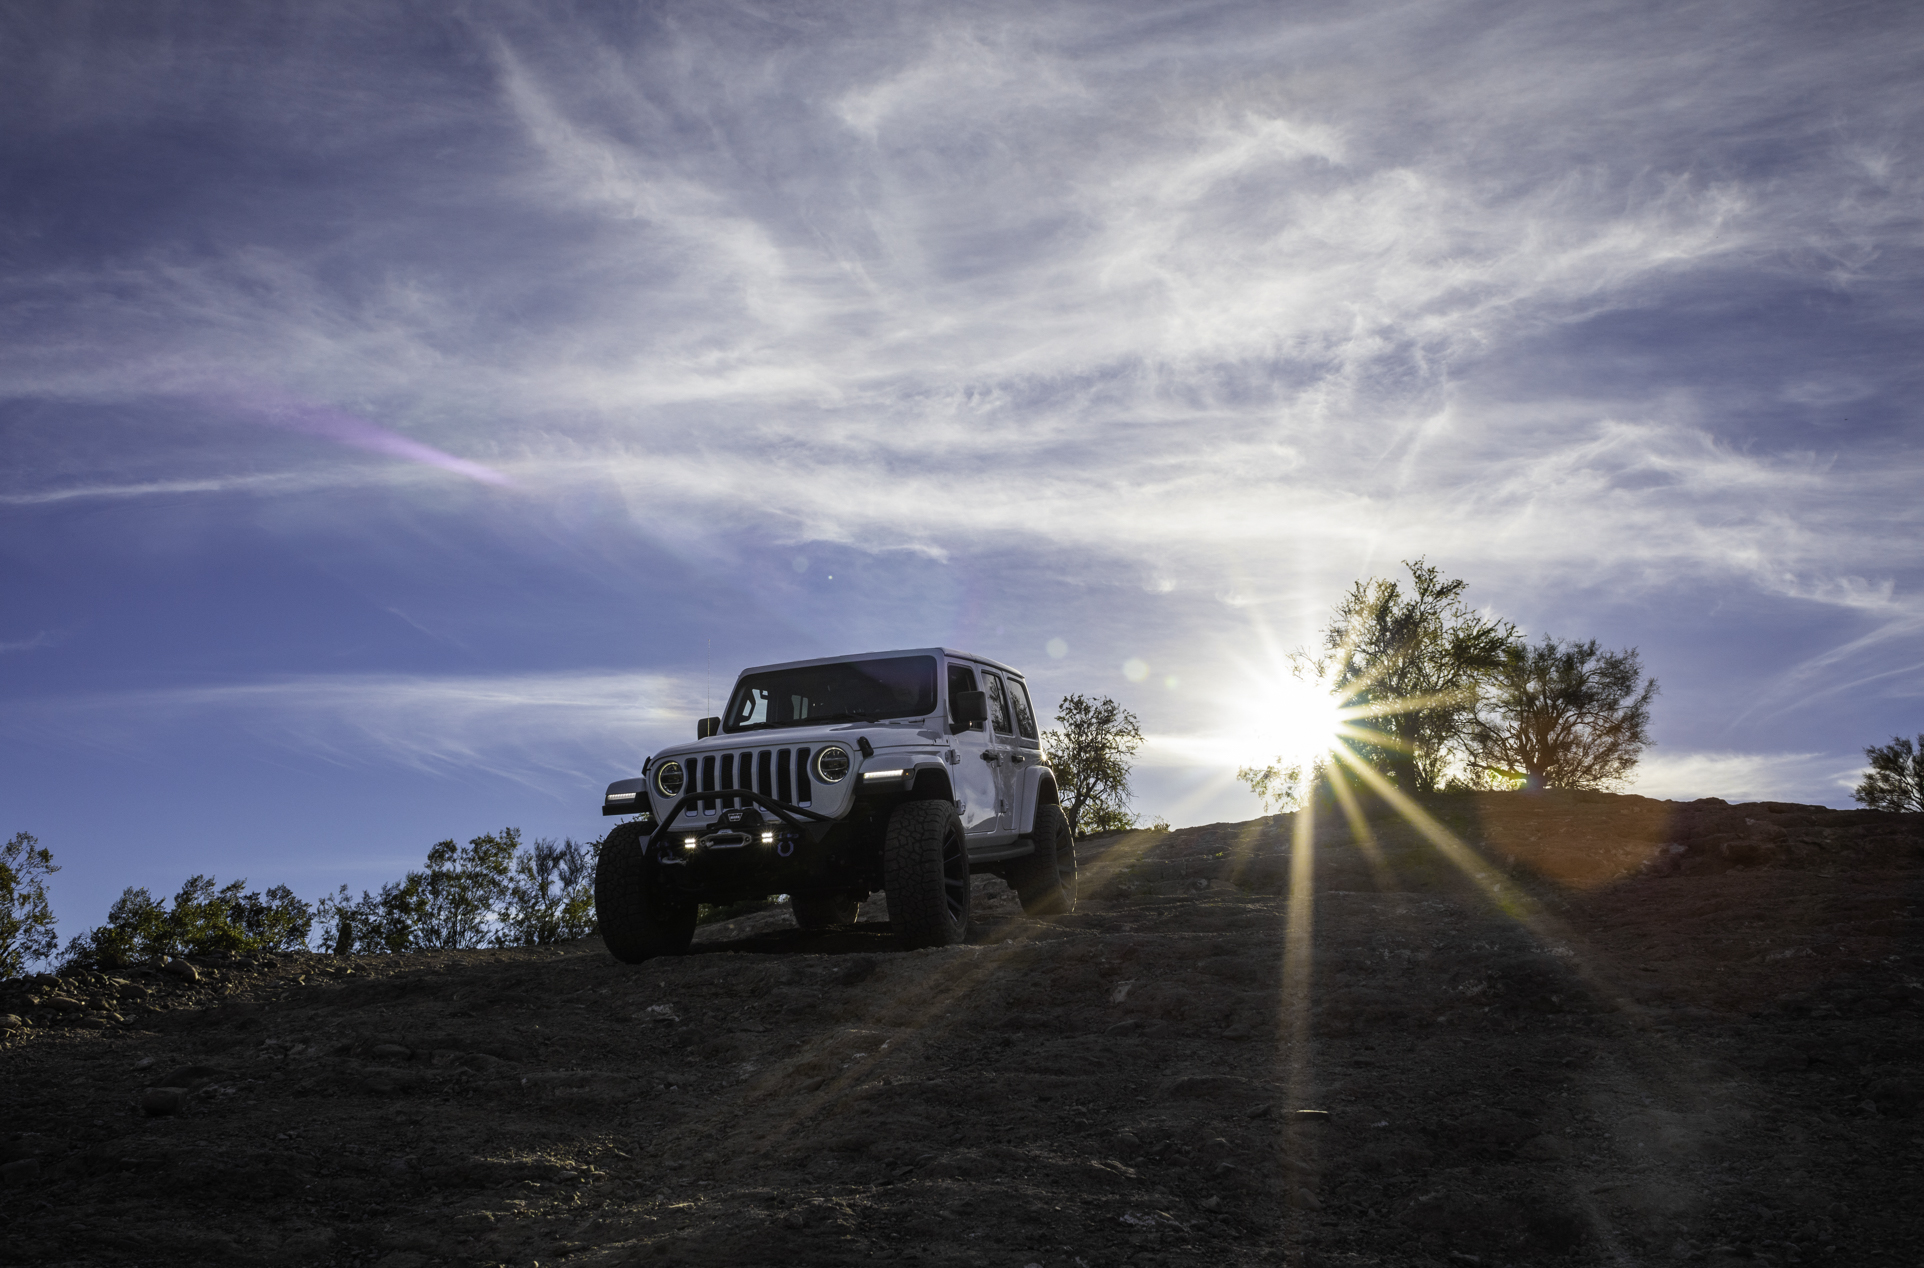 The Jeep Wrangler is the SUV with the best resale value partly because of the off-road prowess demonstrated by this white Wrangler climbing down a rocky hill